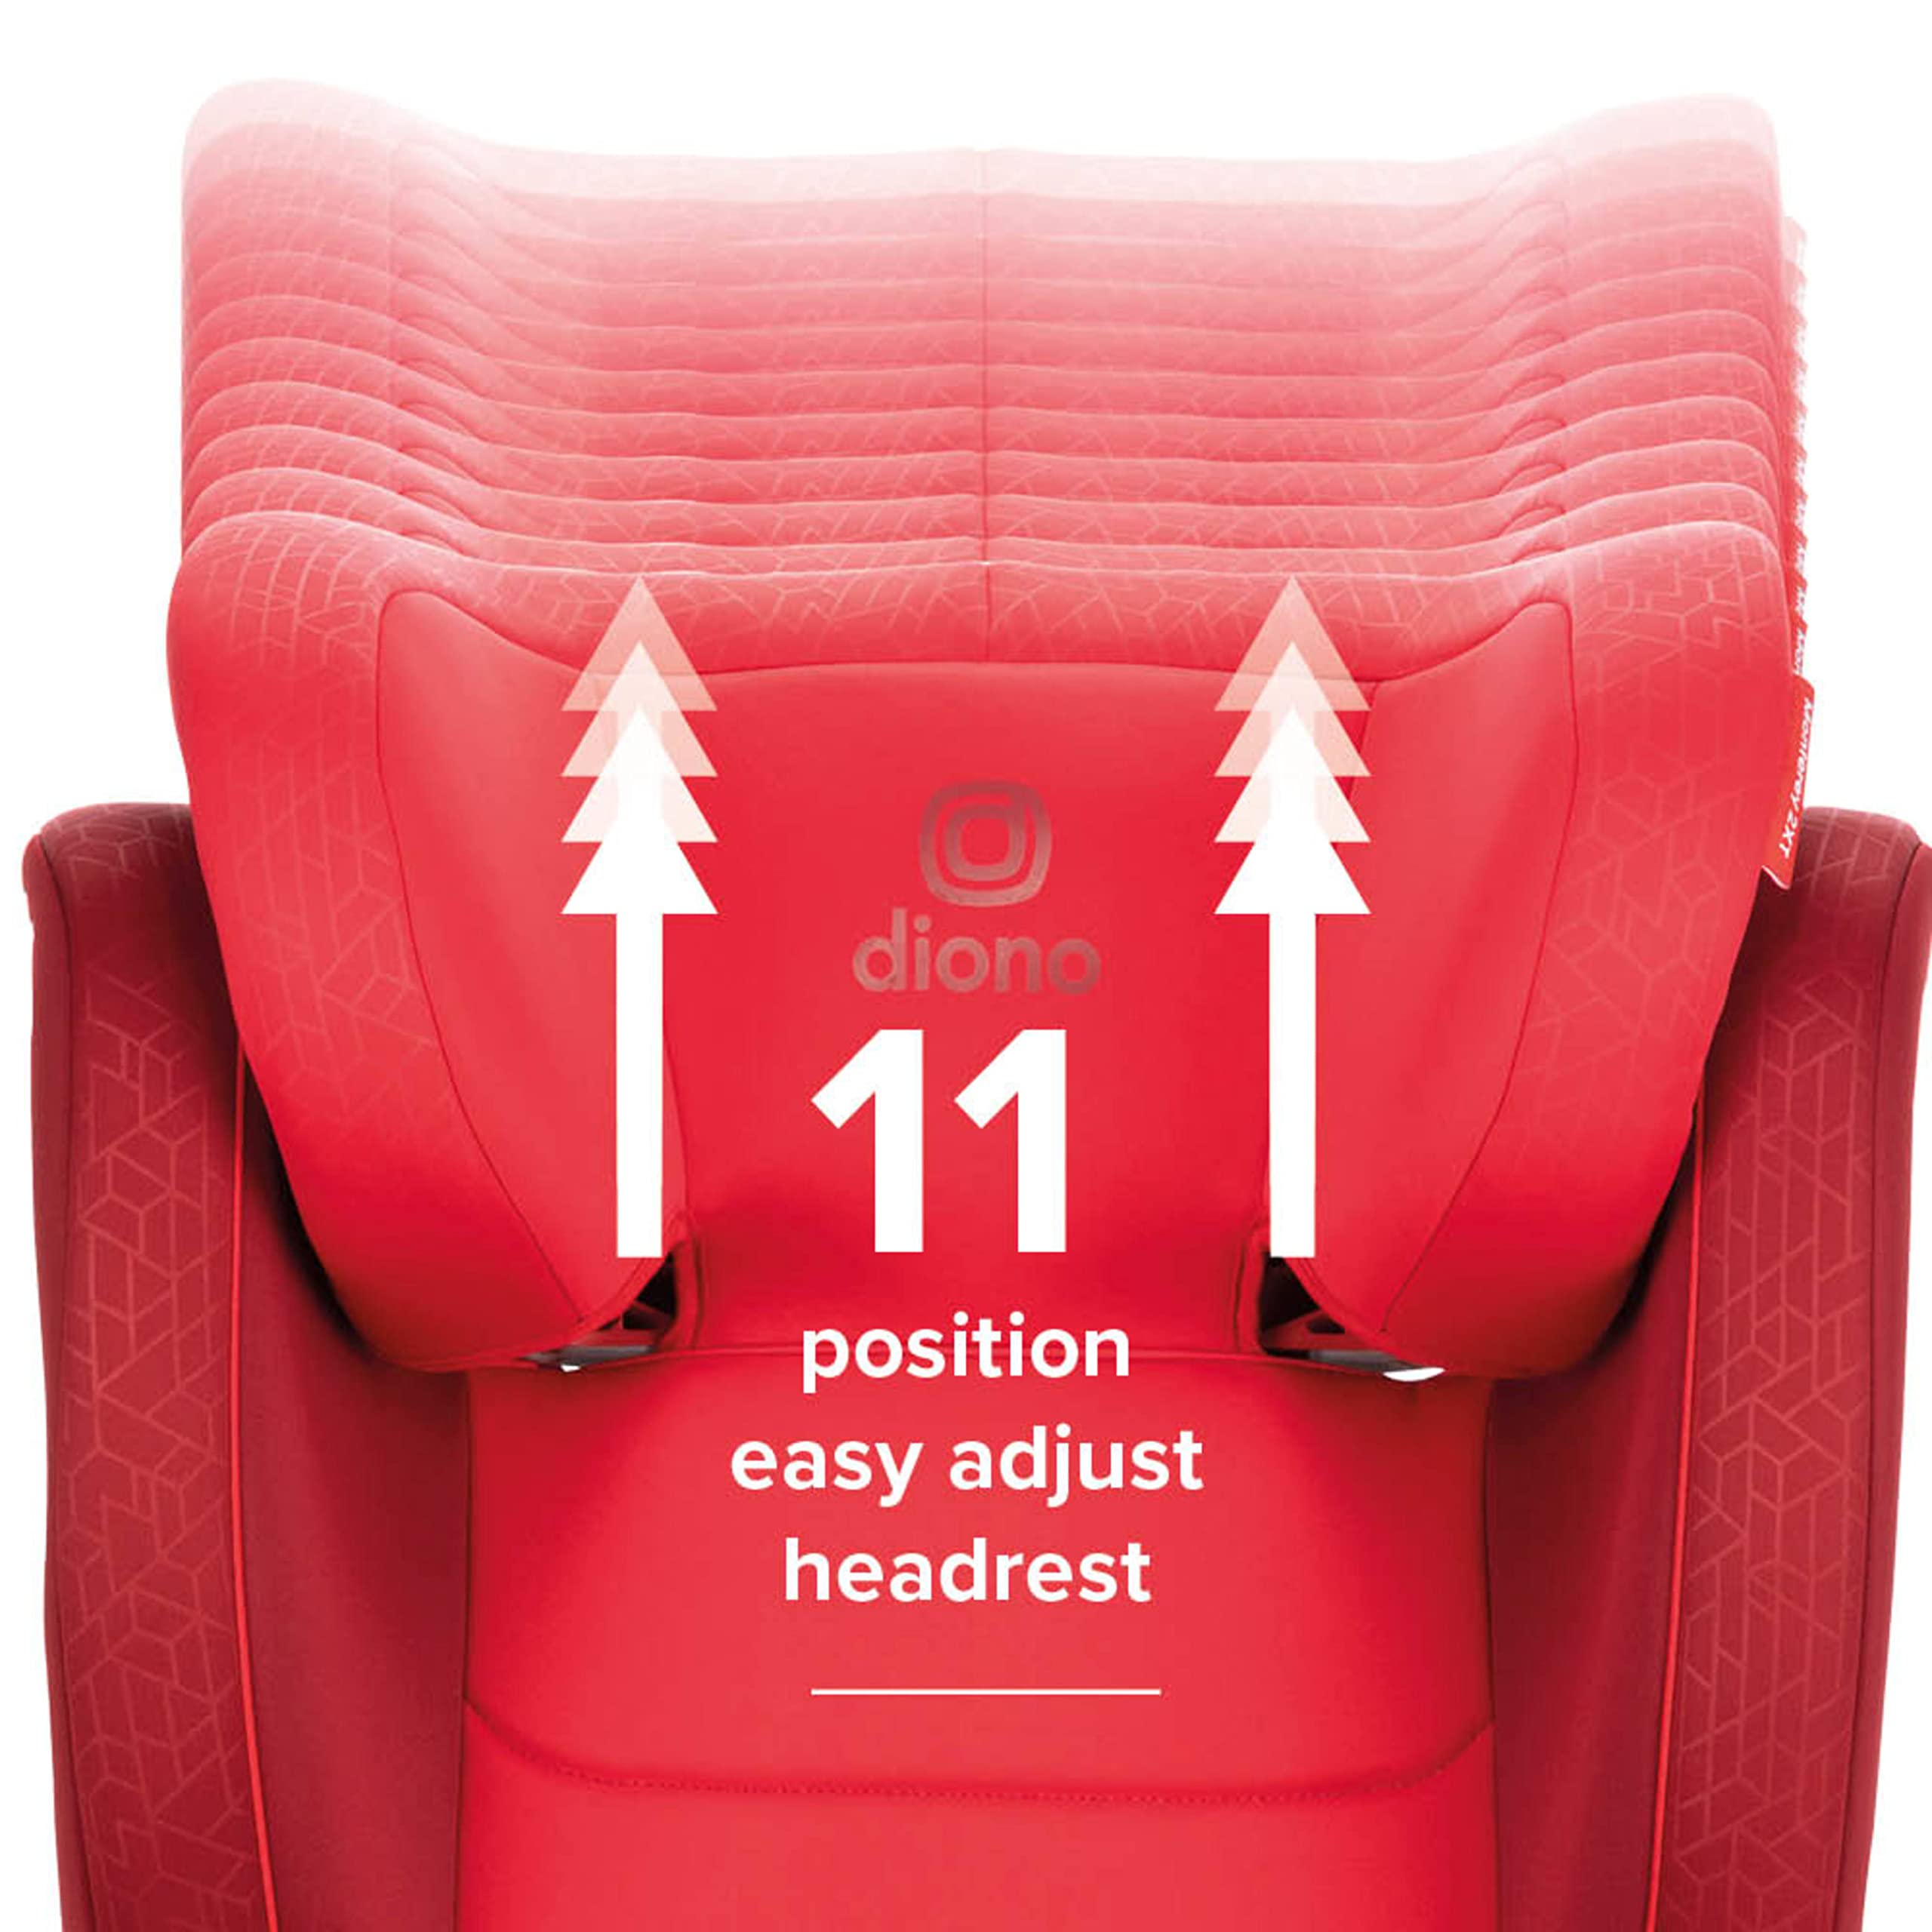 Diono Monterey 2XT Latch 2 in 1 High Back Booster Car Seat with Expandable Height & Width, Side Impact Protection, 8 Years 1 Booster, Red